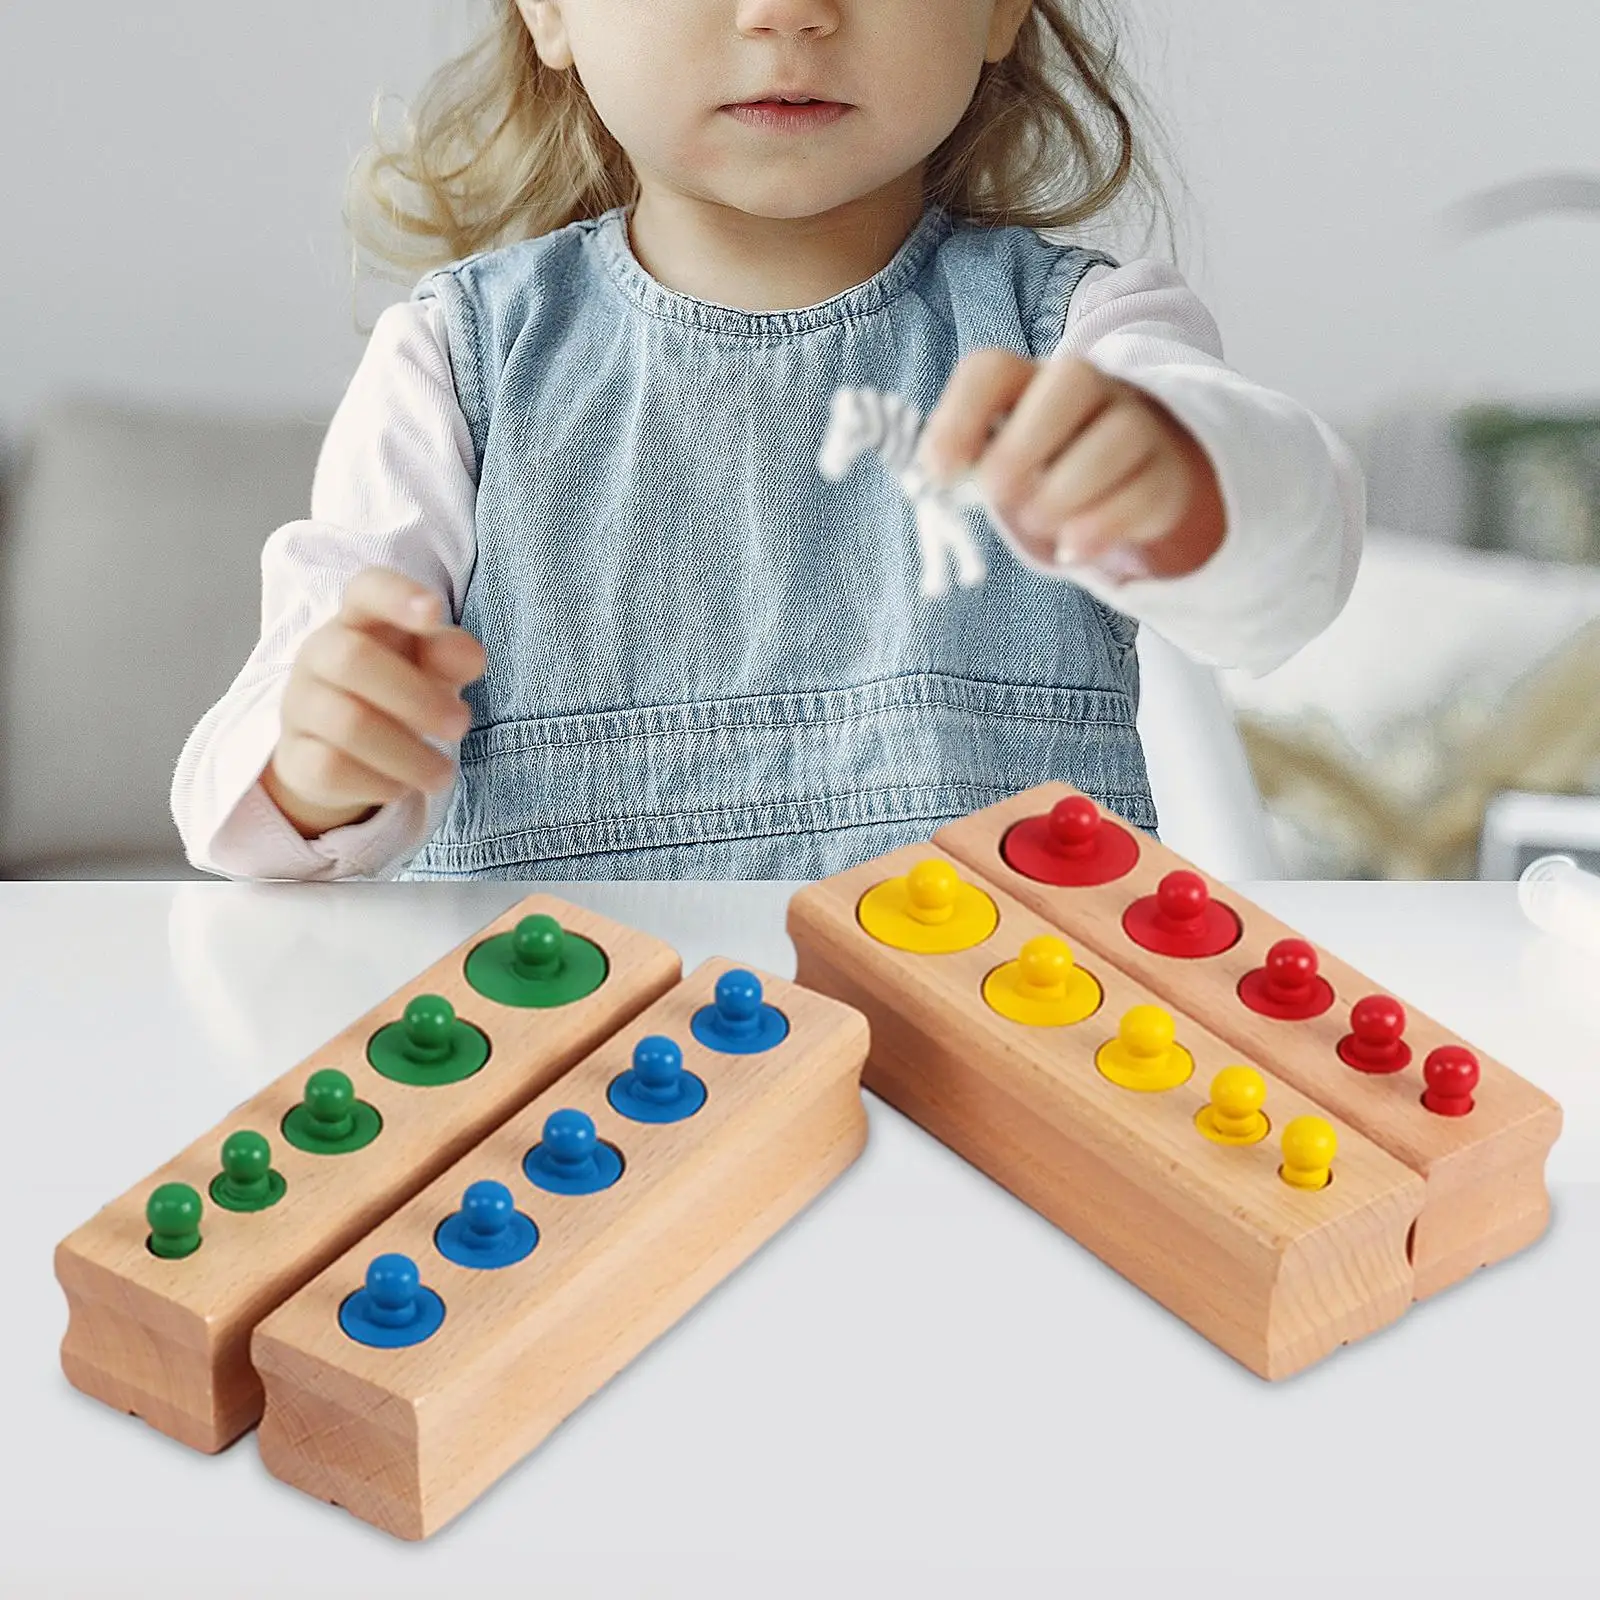 4x Montessori Toy Board Game Educational Early Development Knobbed Cylinders Blocks Socket for School Preschool Toys Toddlers